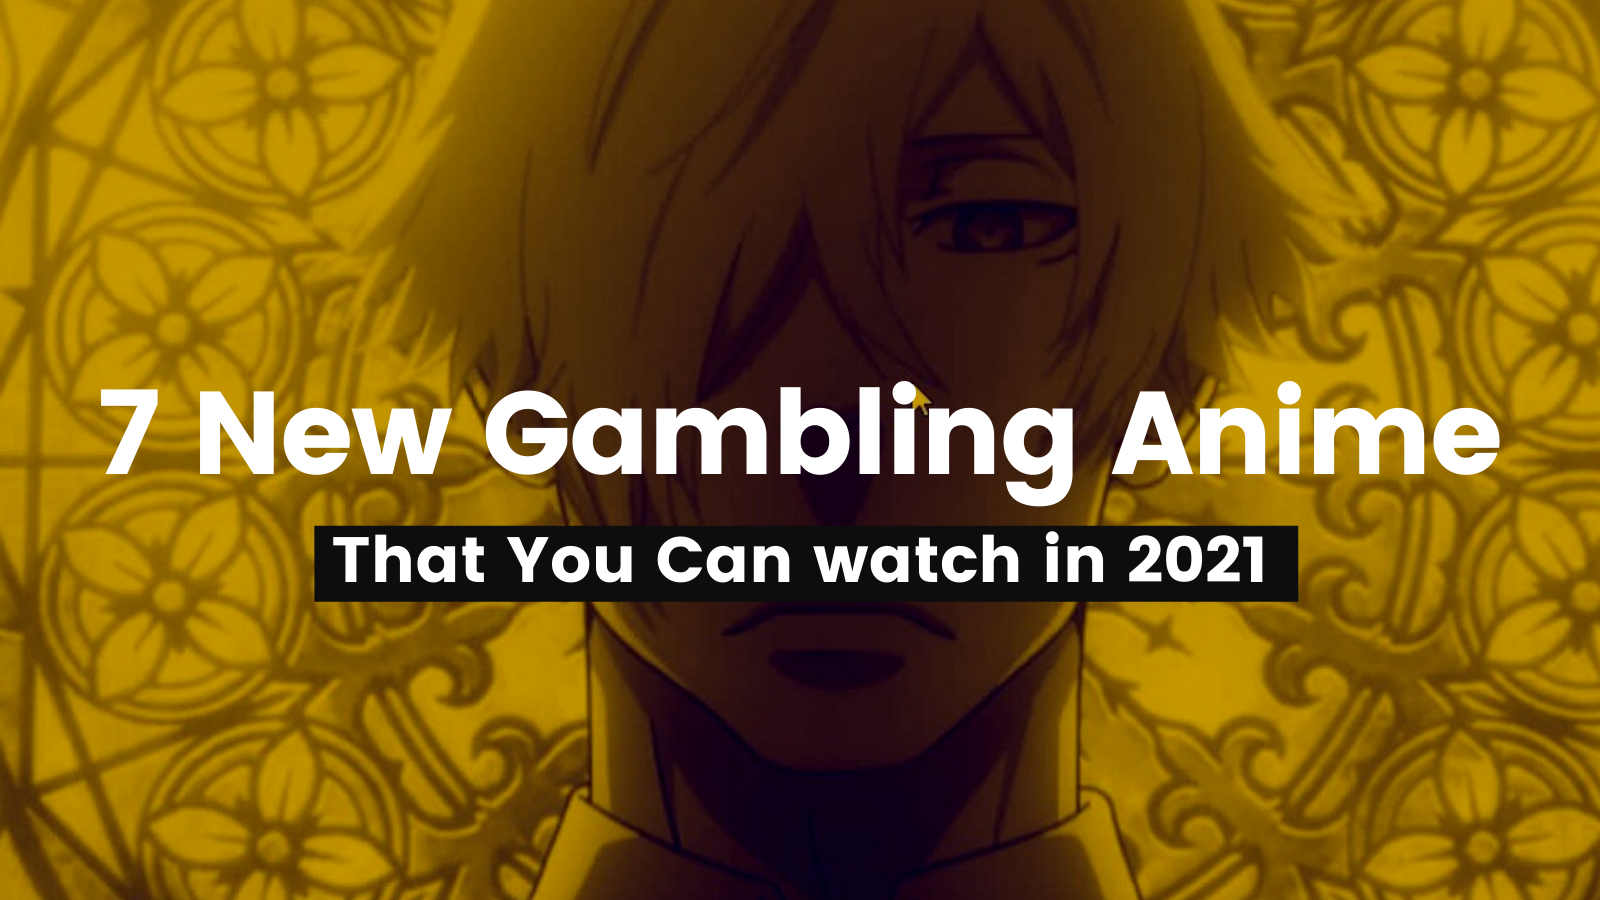 Read more about the article 7 New Gambling Anime That You Can watch in 2021<div class="yasr-vv-stars-title-container"><div class='yasr-stars-title yasr-rater-stars'
                          id='yasr-visitor-votes-readonly-rater-c4b53eca60465'
                          data-rating='0'
                          data-rater-starsize='16'
                          data-rater-postid='2689'
                          data-rater-readonly='true'
                          data-readonly-attribute='true'
                      ></div><span class='yasr-stars-title-average'>0 (0)</span></div>